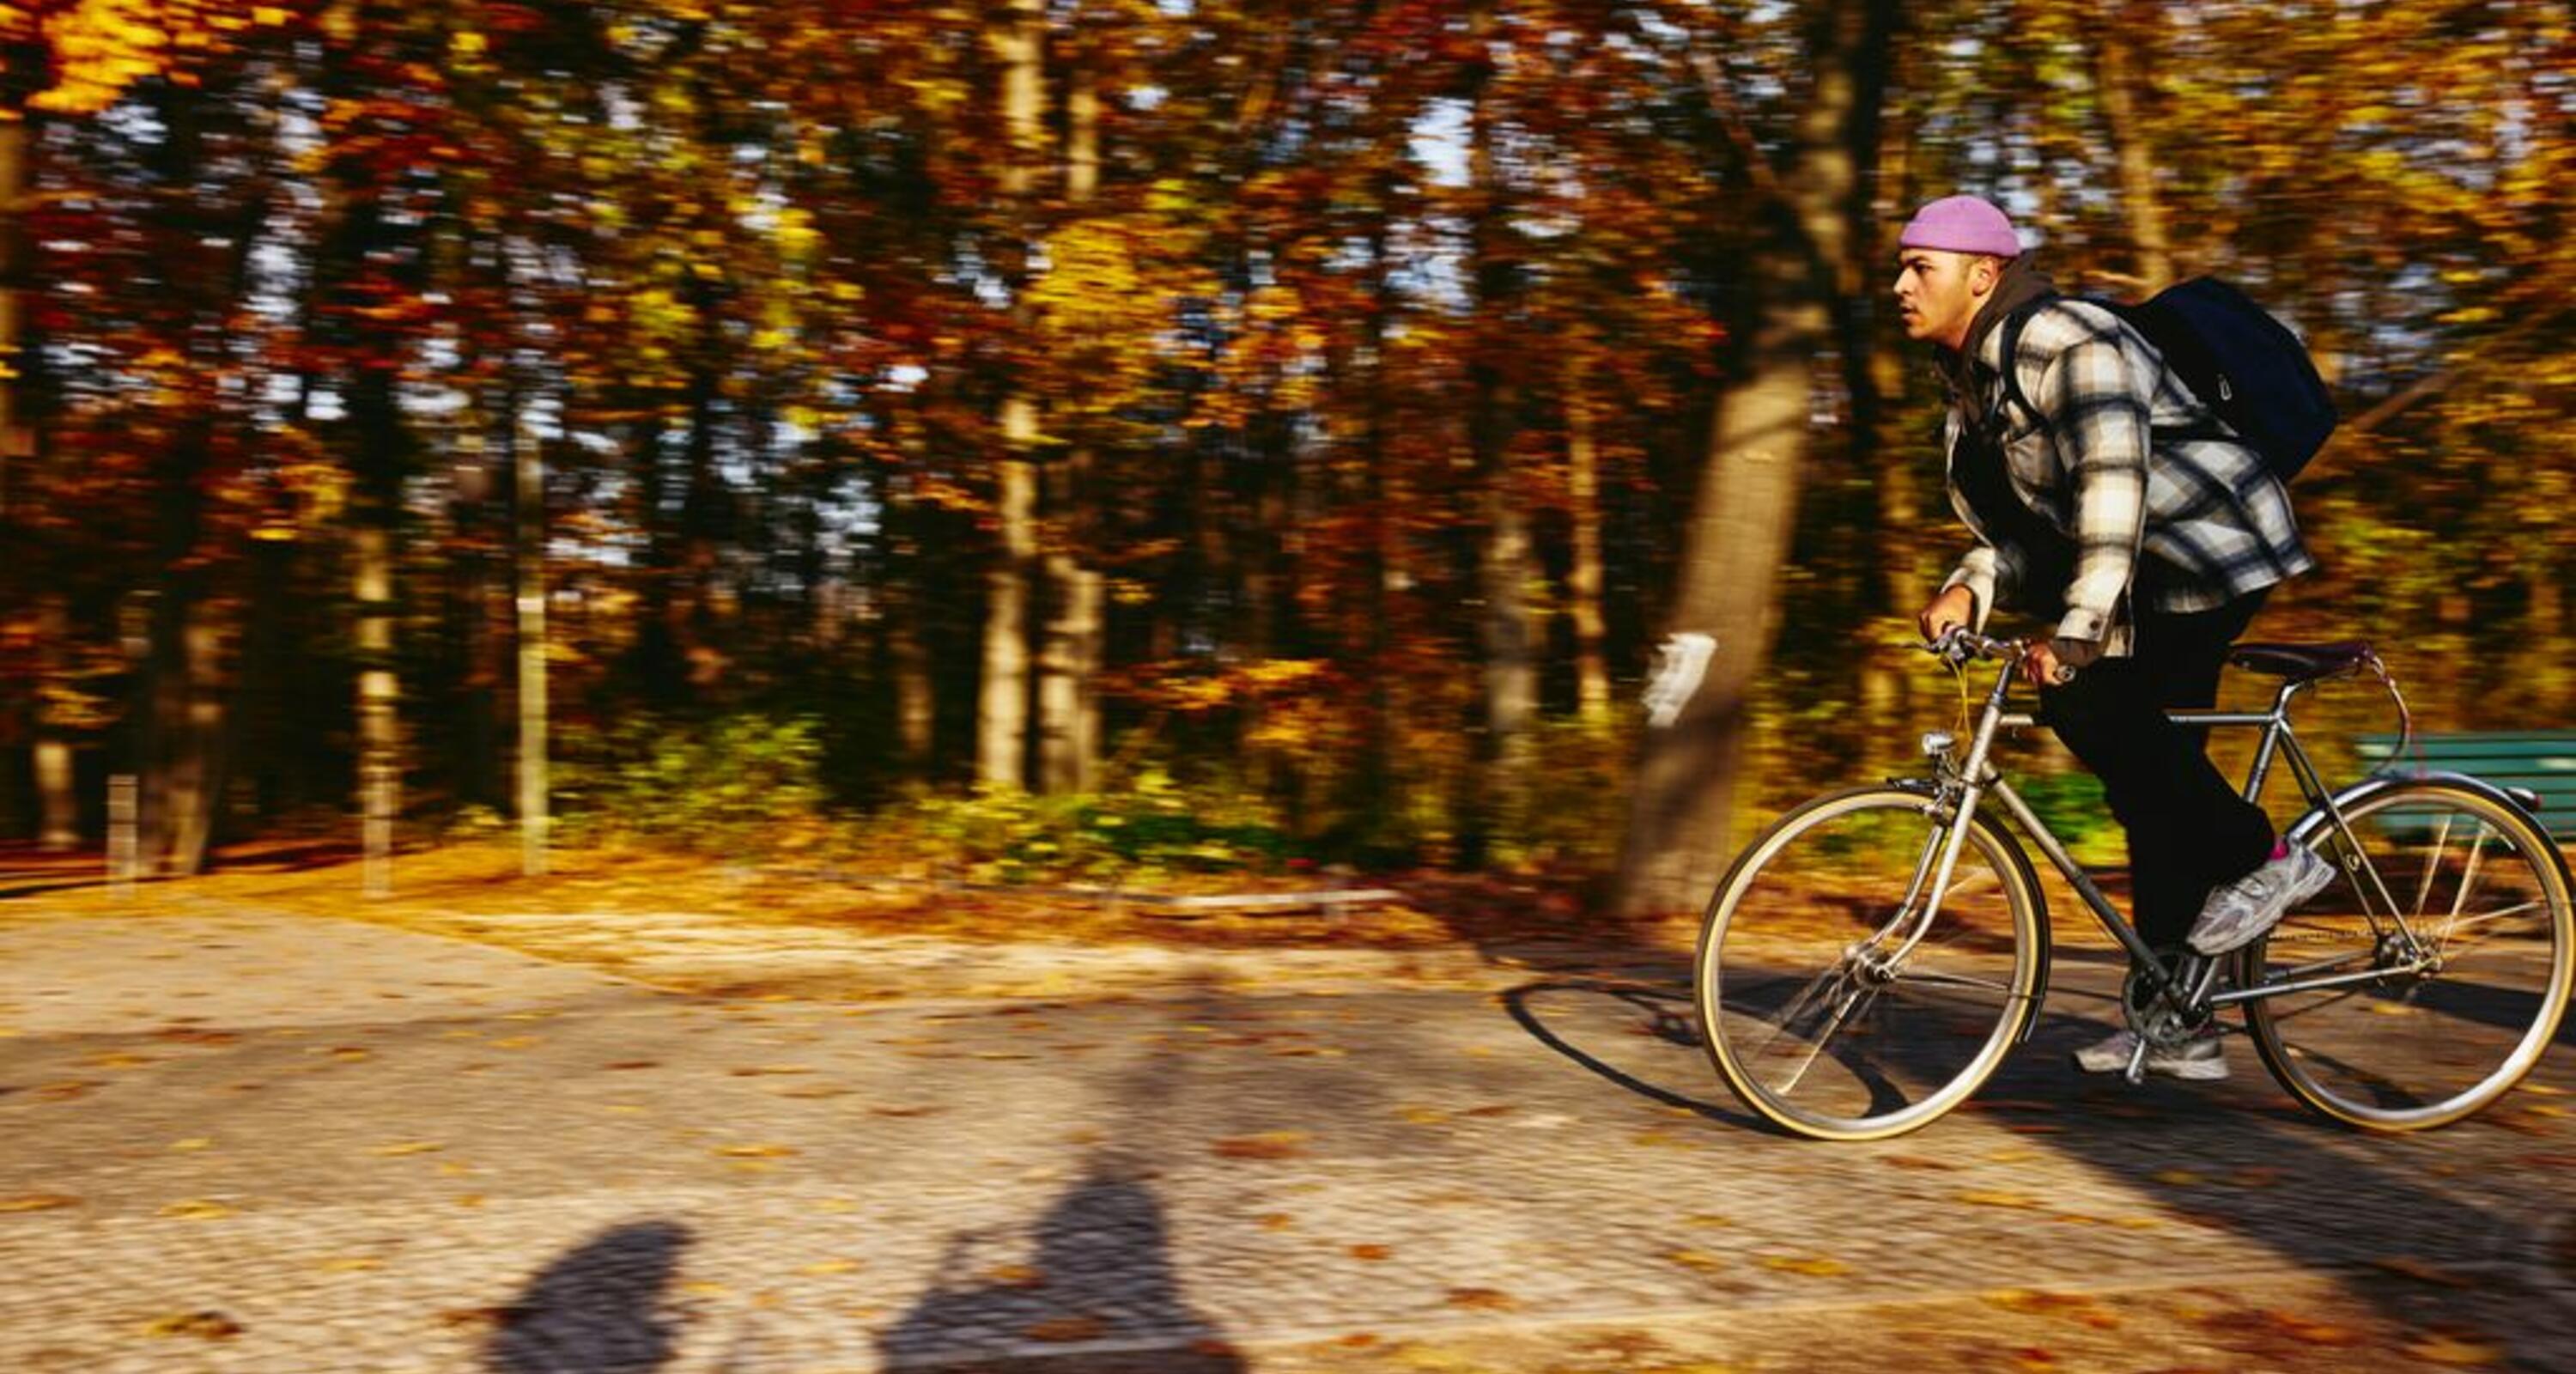 Cycling man, autumn trees on the background.